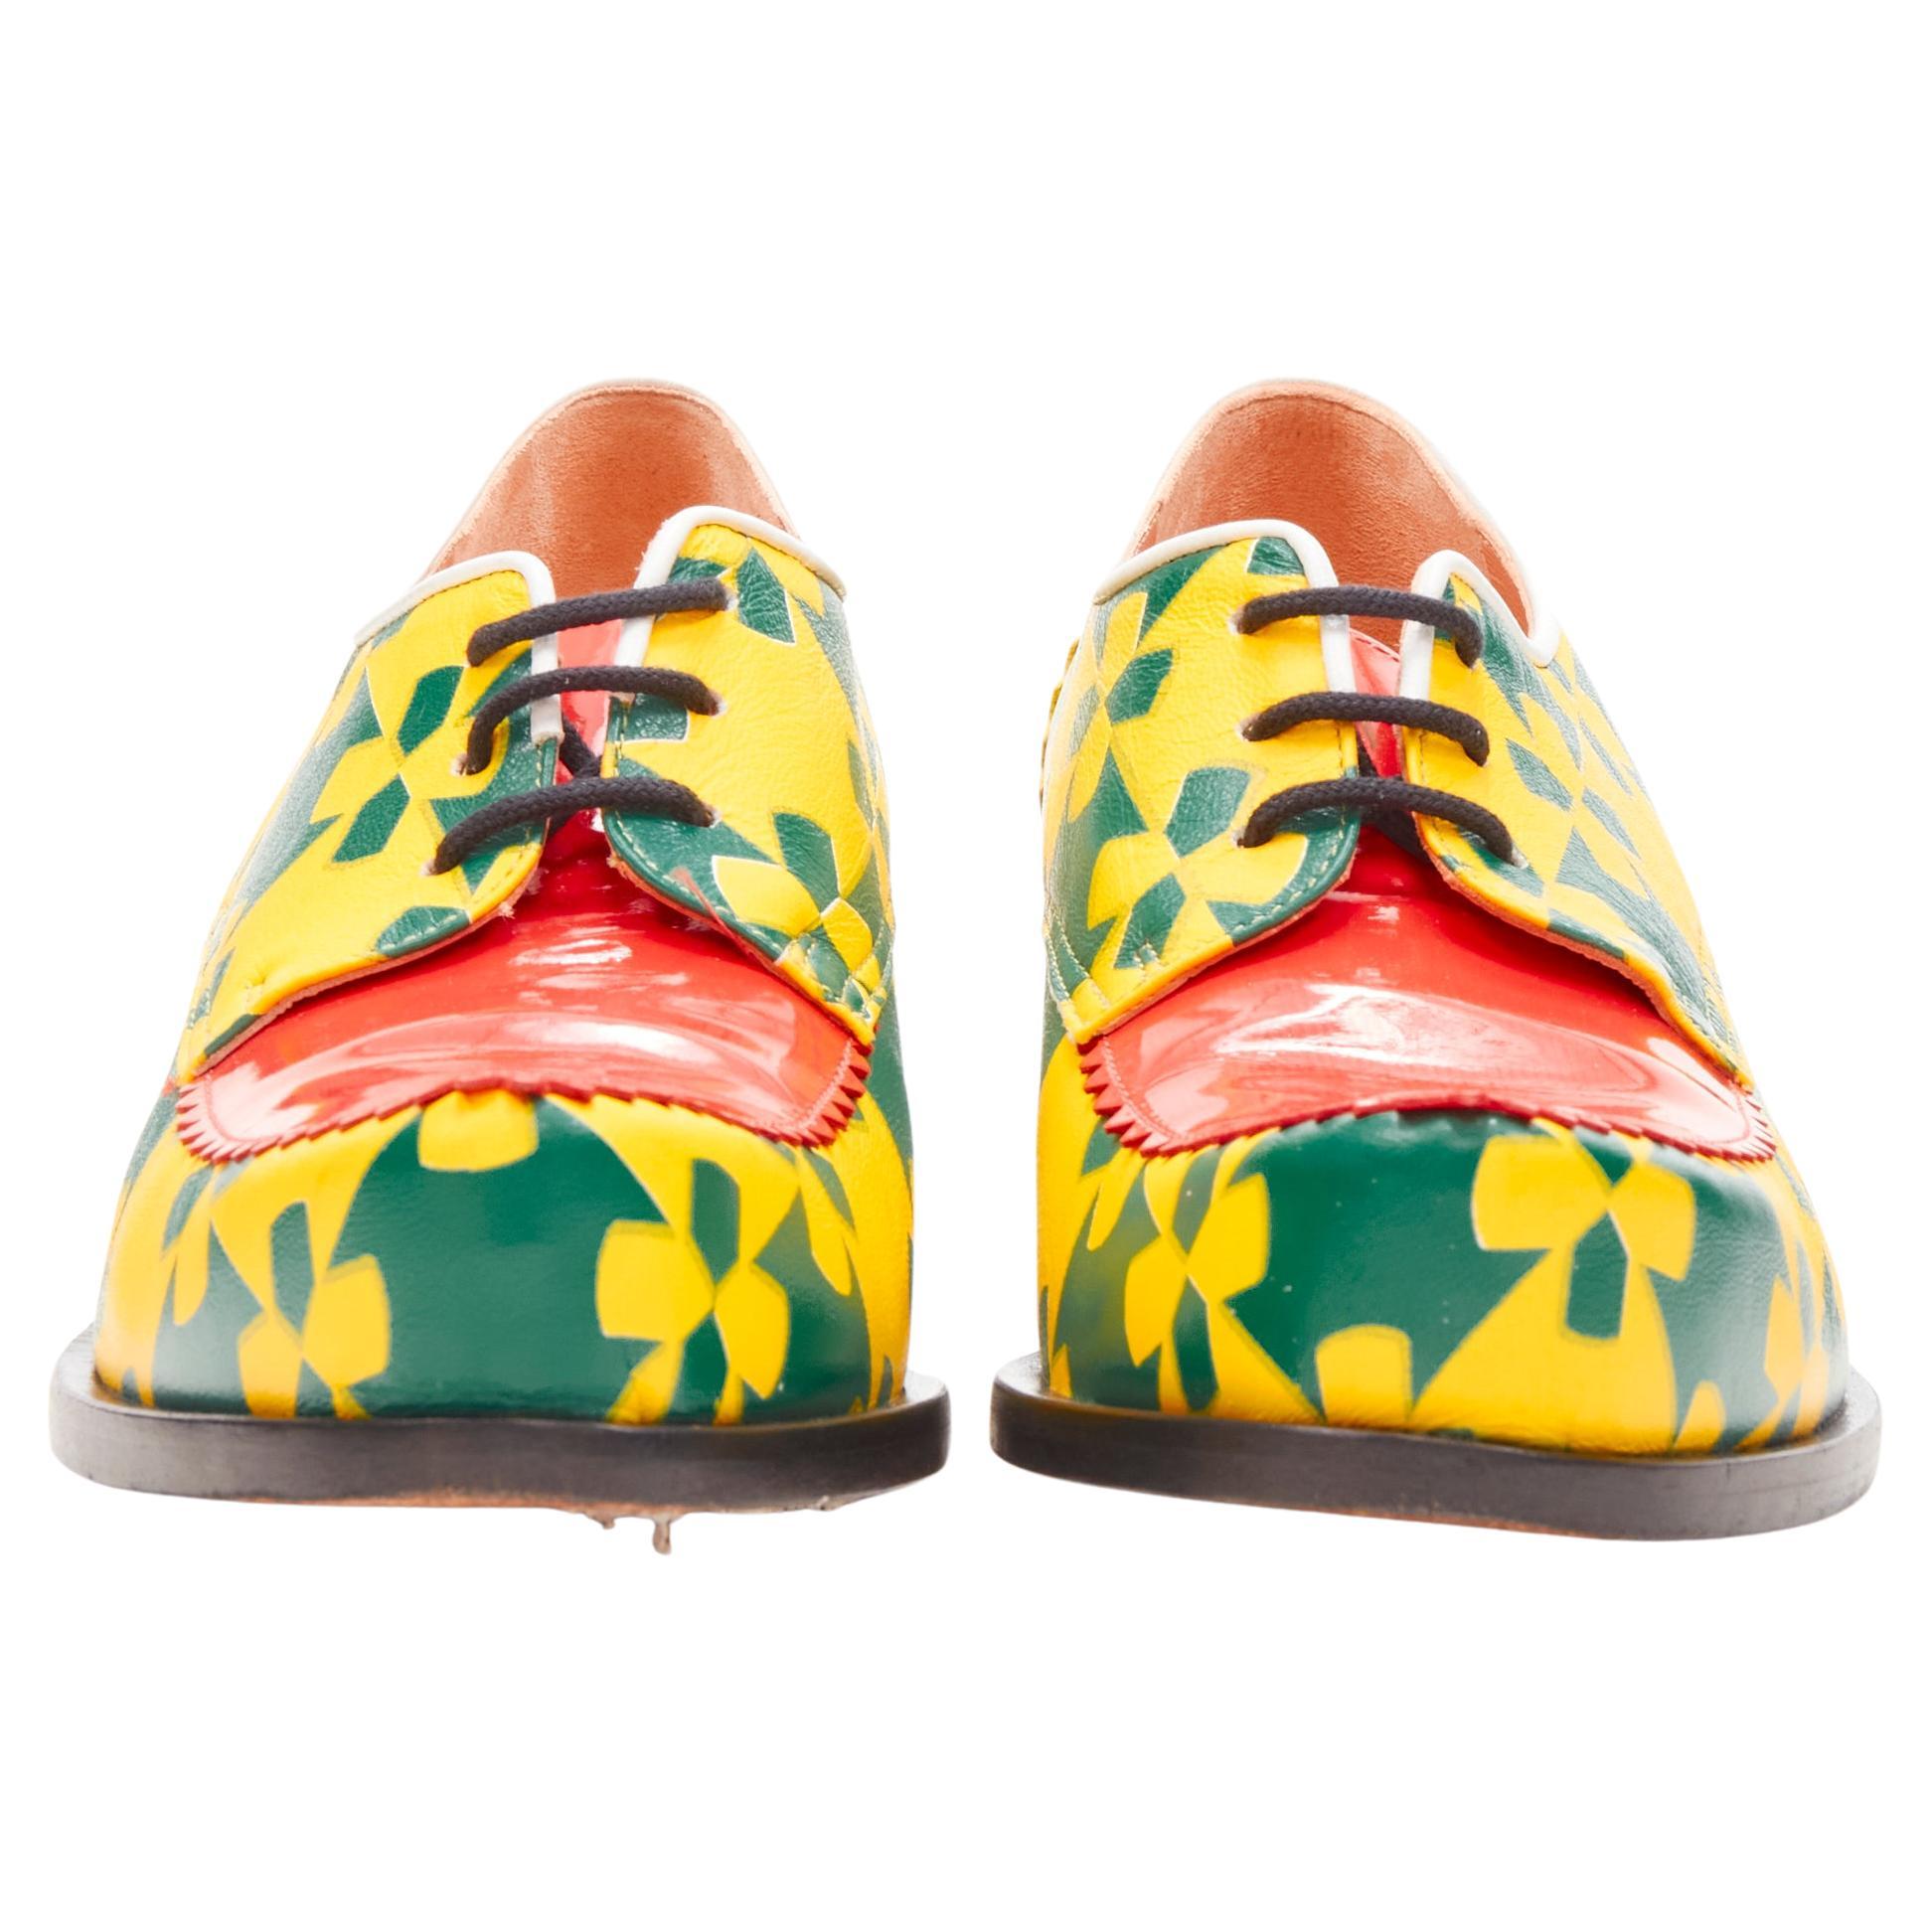 rare ROBERT CLERGERIE LOUISE GRAY Sirenlg yellow green graphic brogue EU37
Brand: Robert Clergerie
Model: Sirenlg
Collection: Louise Gray 
Material: Leather
Color: Multicolour
Pattern: Floral
Closure: Lace Up

CONDITION:
Condition: Excellent, this